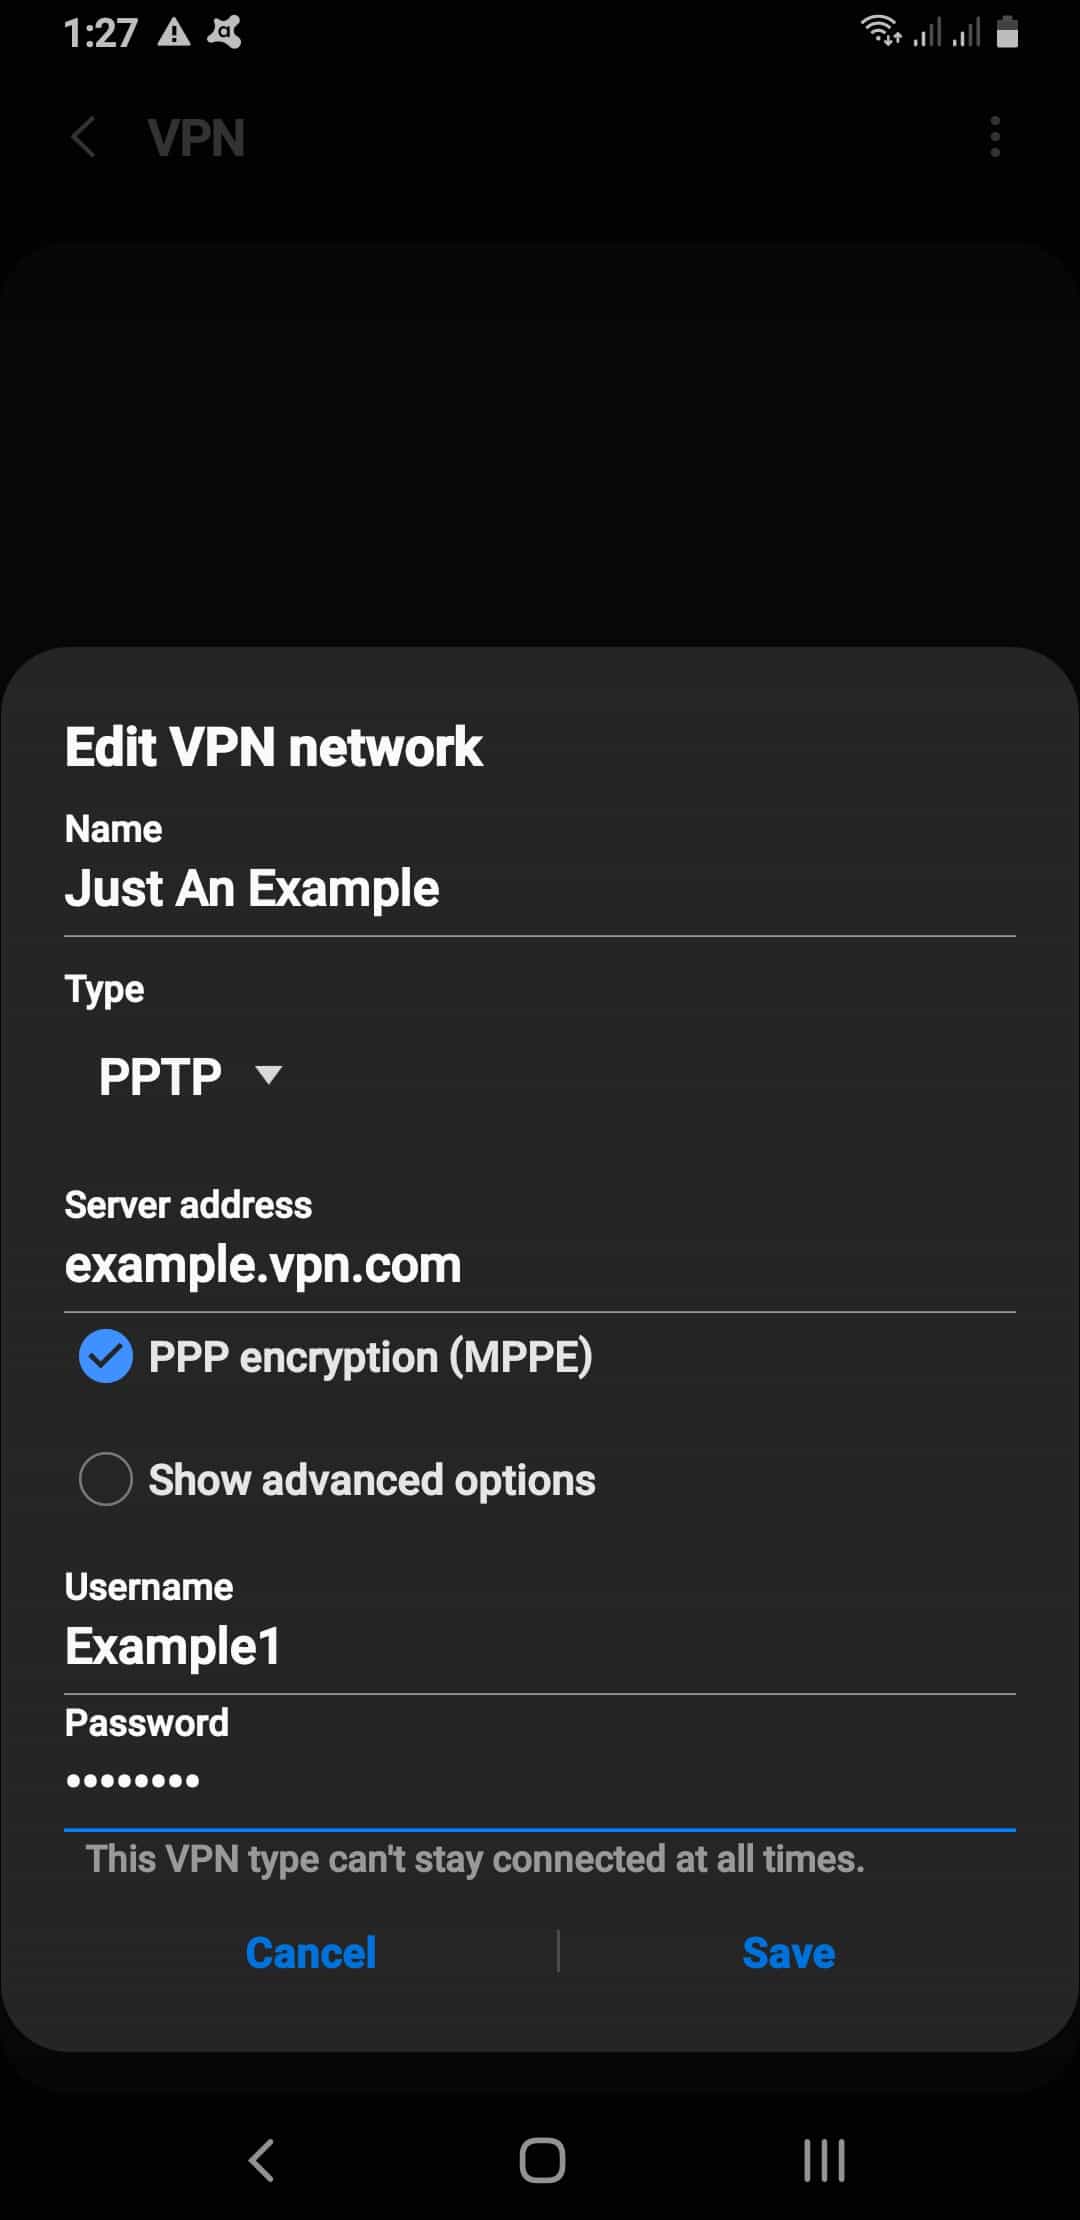 adguard cannot create a vpn connection on android